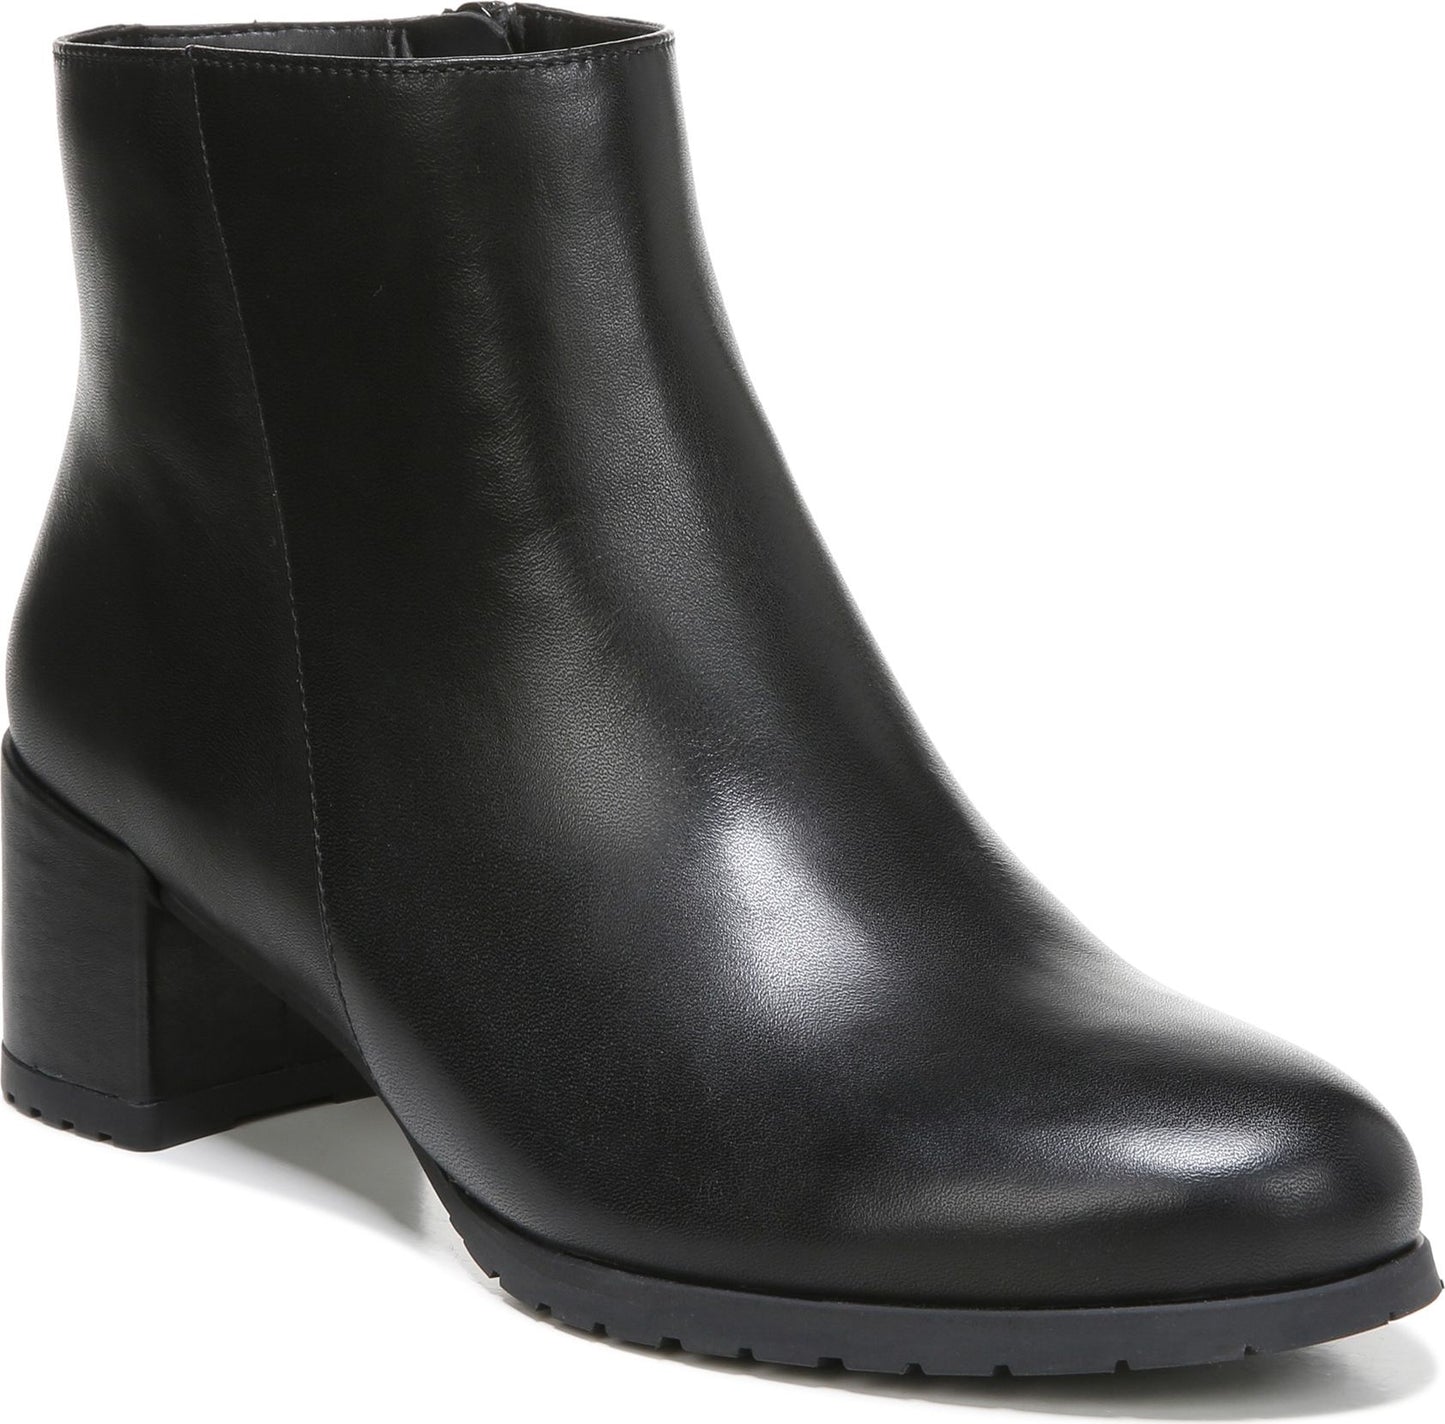 Naturalizer Boots Bay Black Waterproof Leather - Wide